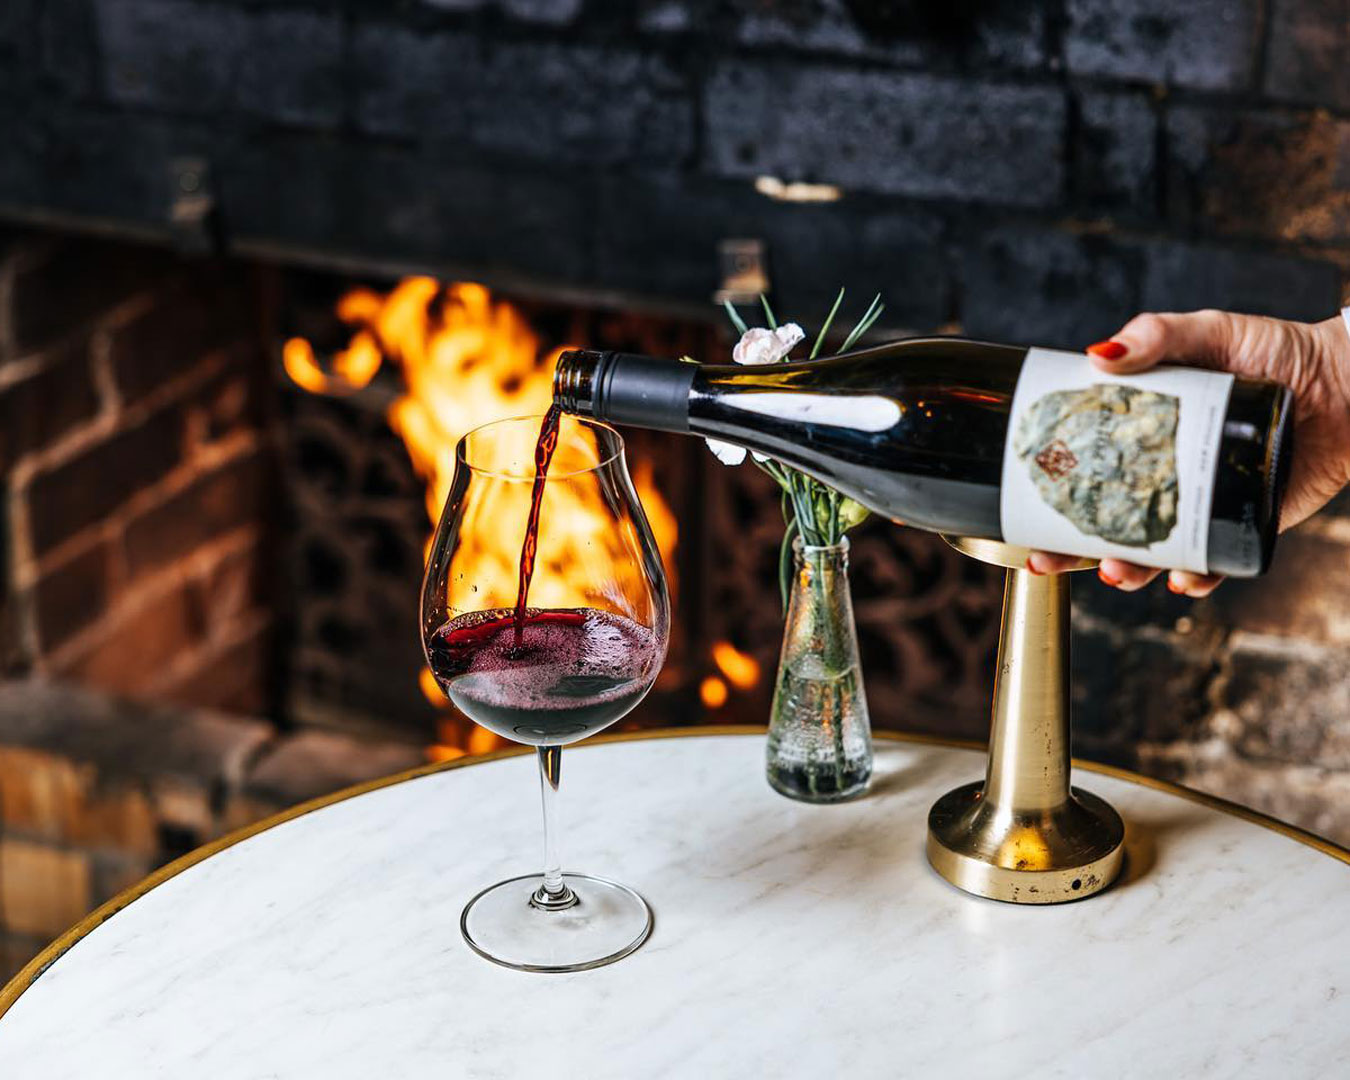 Red wine pouring into a glass in front of fireplace